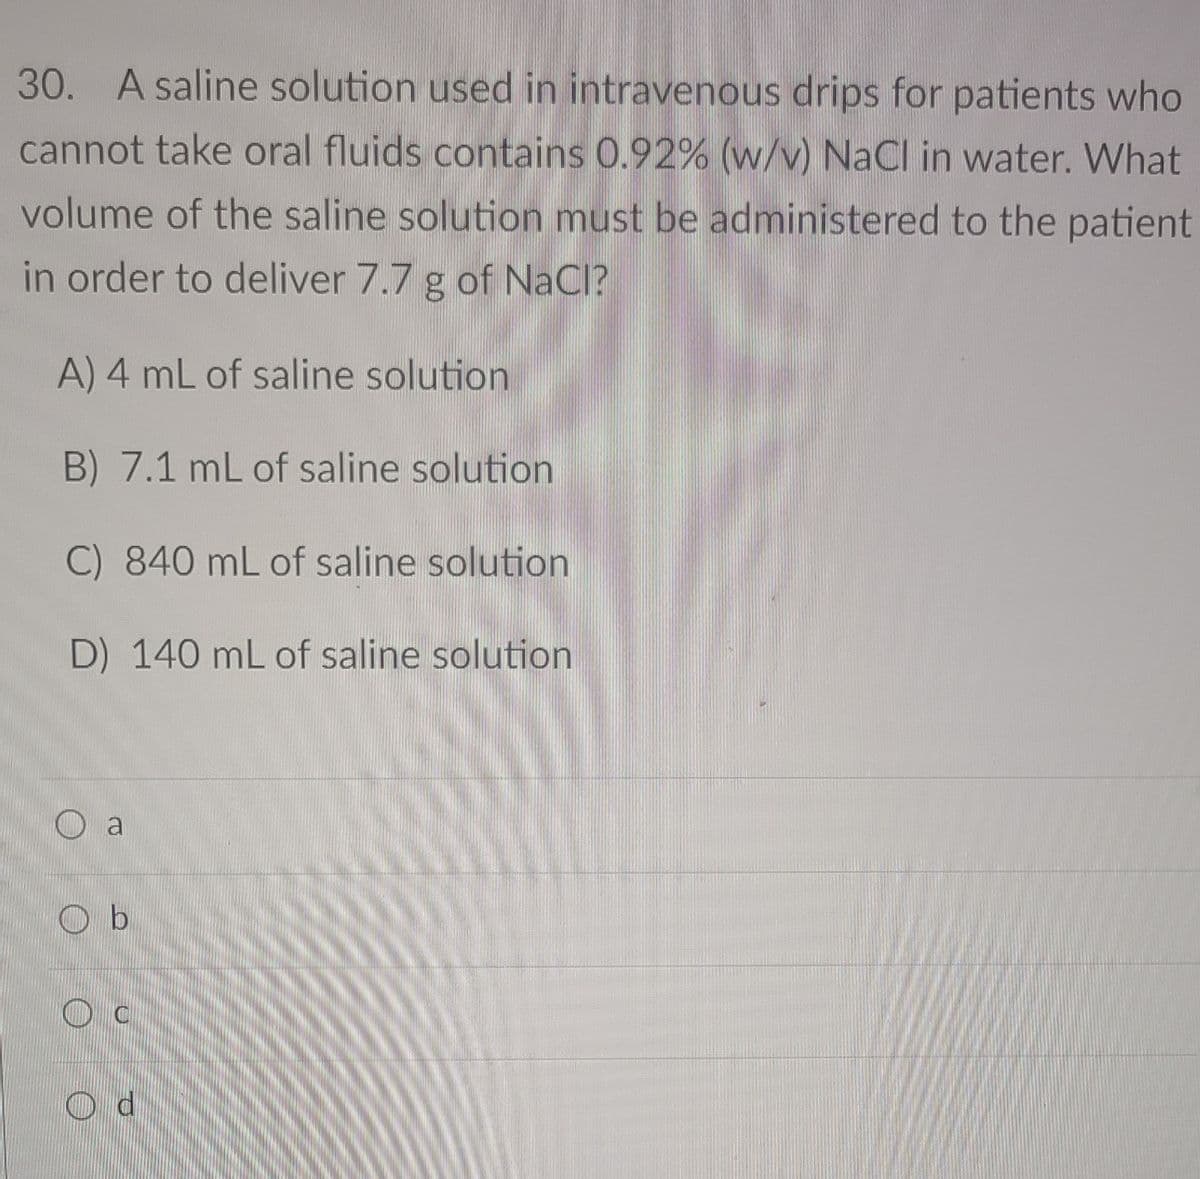 30. A saline solution used in intravenous drips for patients who
cannot take oral fluids contains 0.92% (w/v) NaCl in water. What
volume of the saline solution must be administered to the patient
in order to deliver 7.7 g of NaCl?
A) 4 mL of saline solution
B) 7.1 mL of saline solution
C) 840 mL of saline solution
D) 140 mL of saline solution
O a
